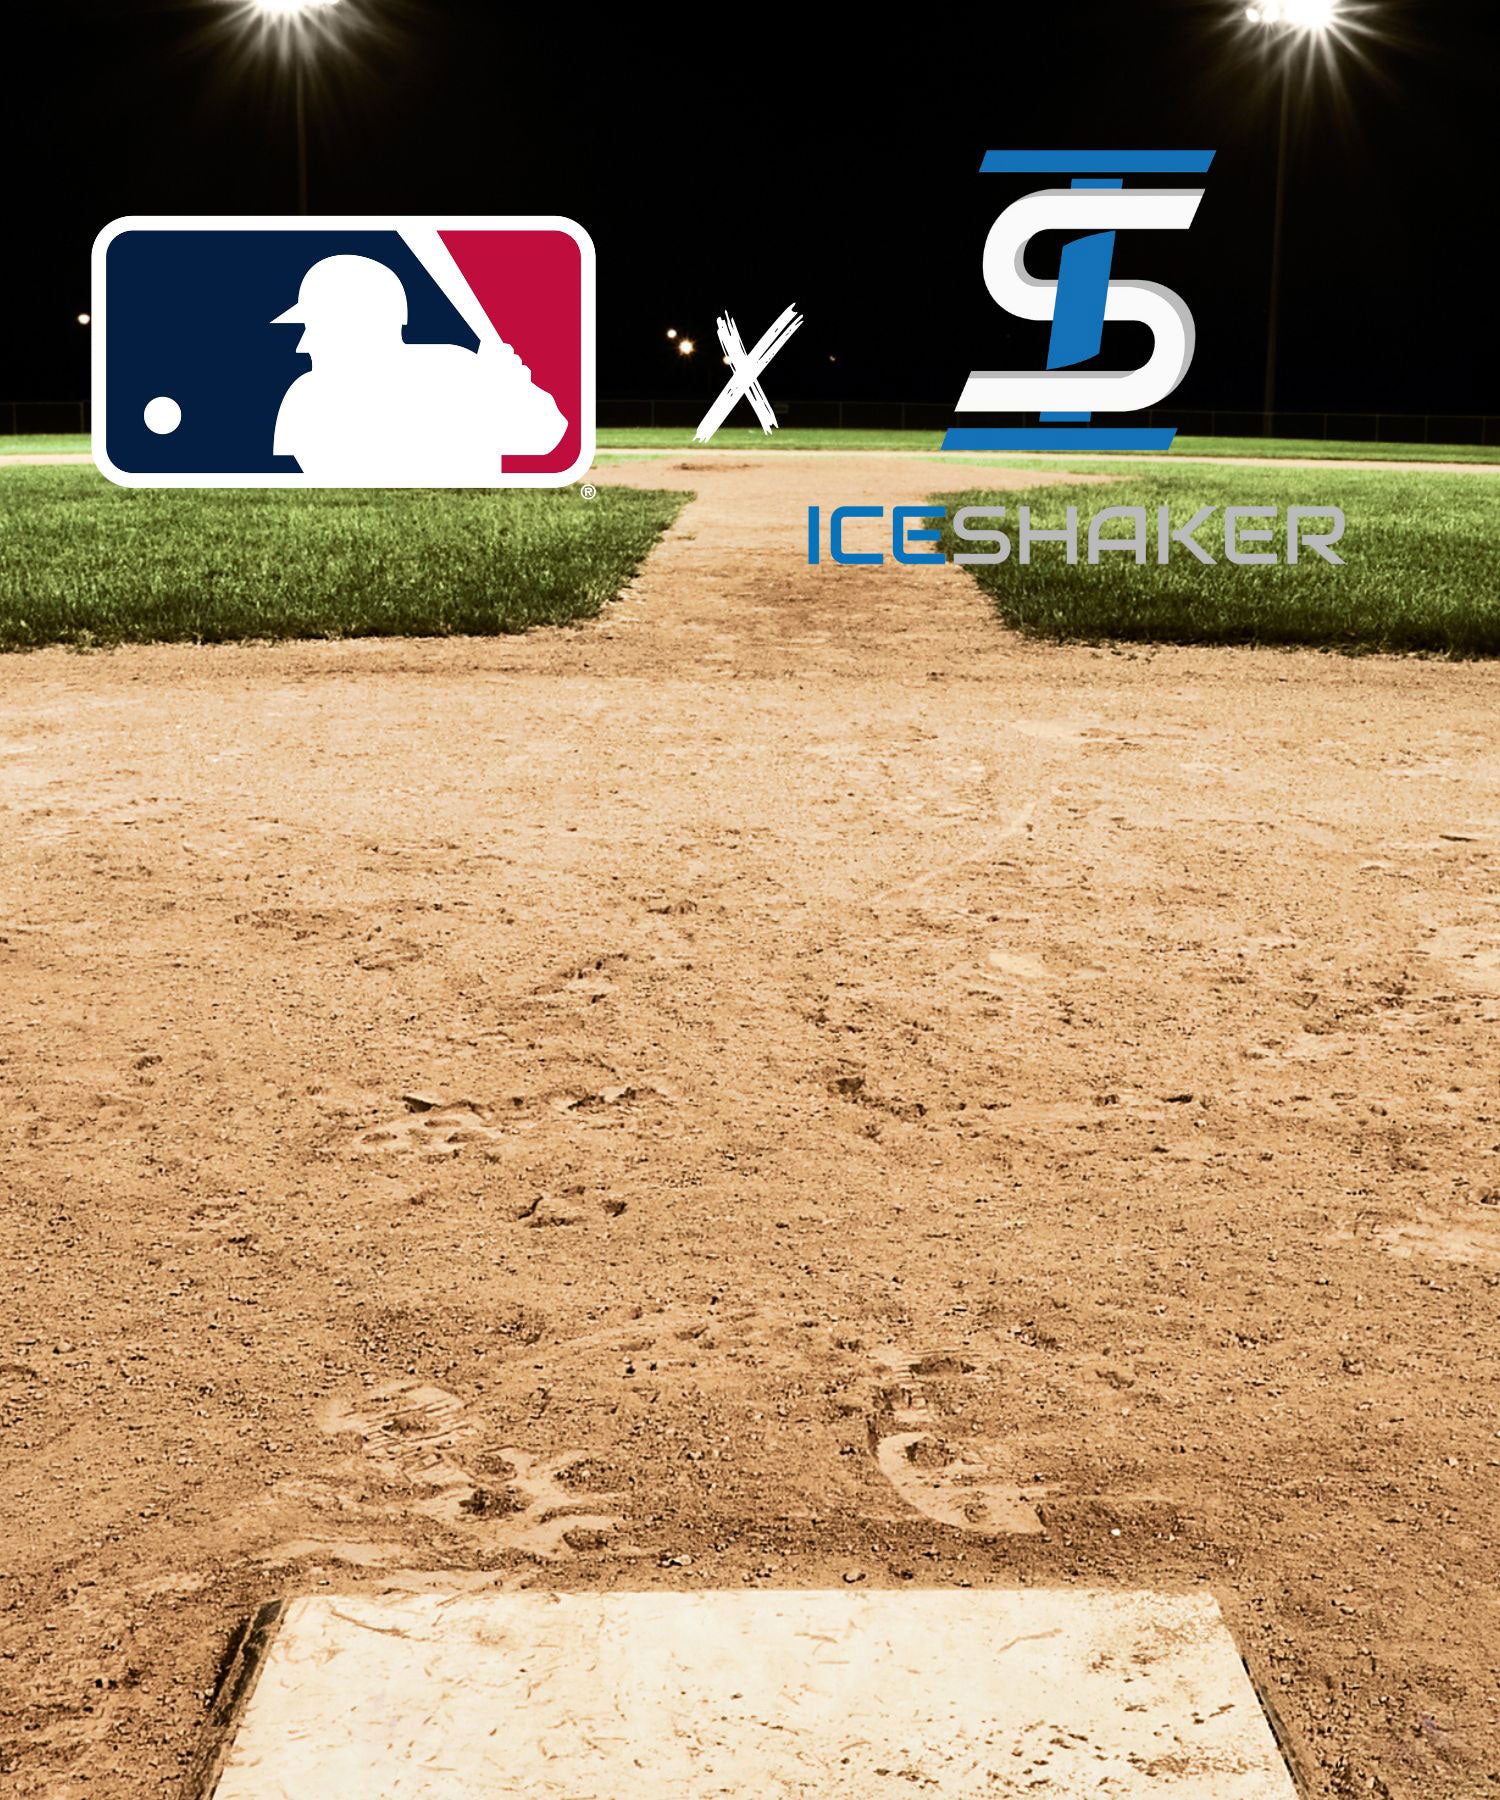 A website banner containing the Official MLB logo next to the Official Ice shaker Logo.